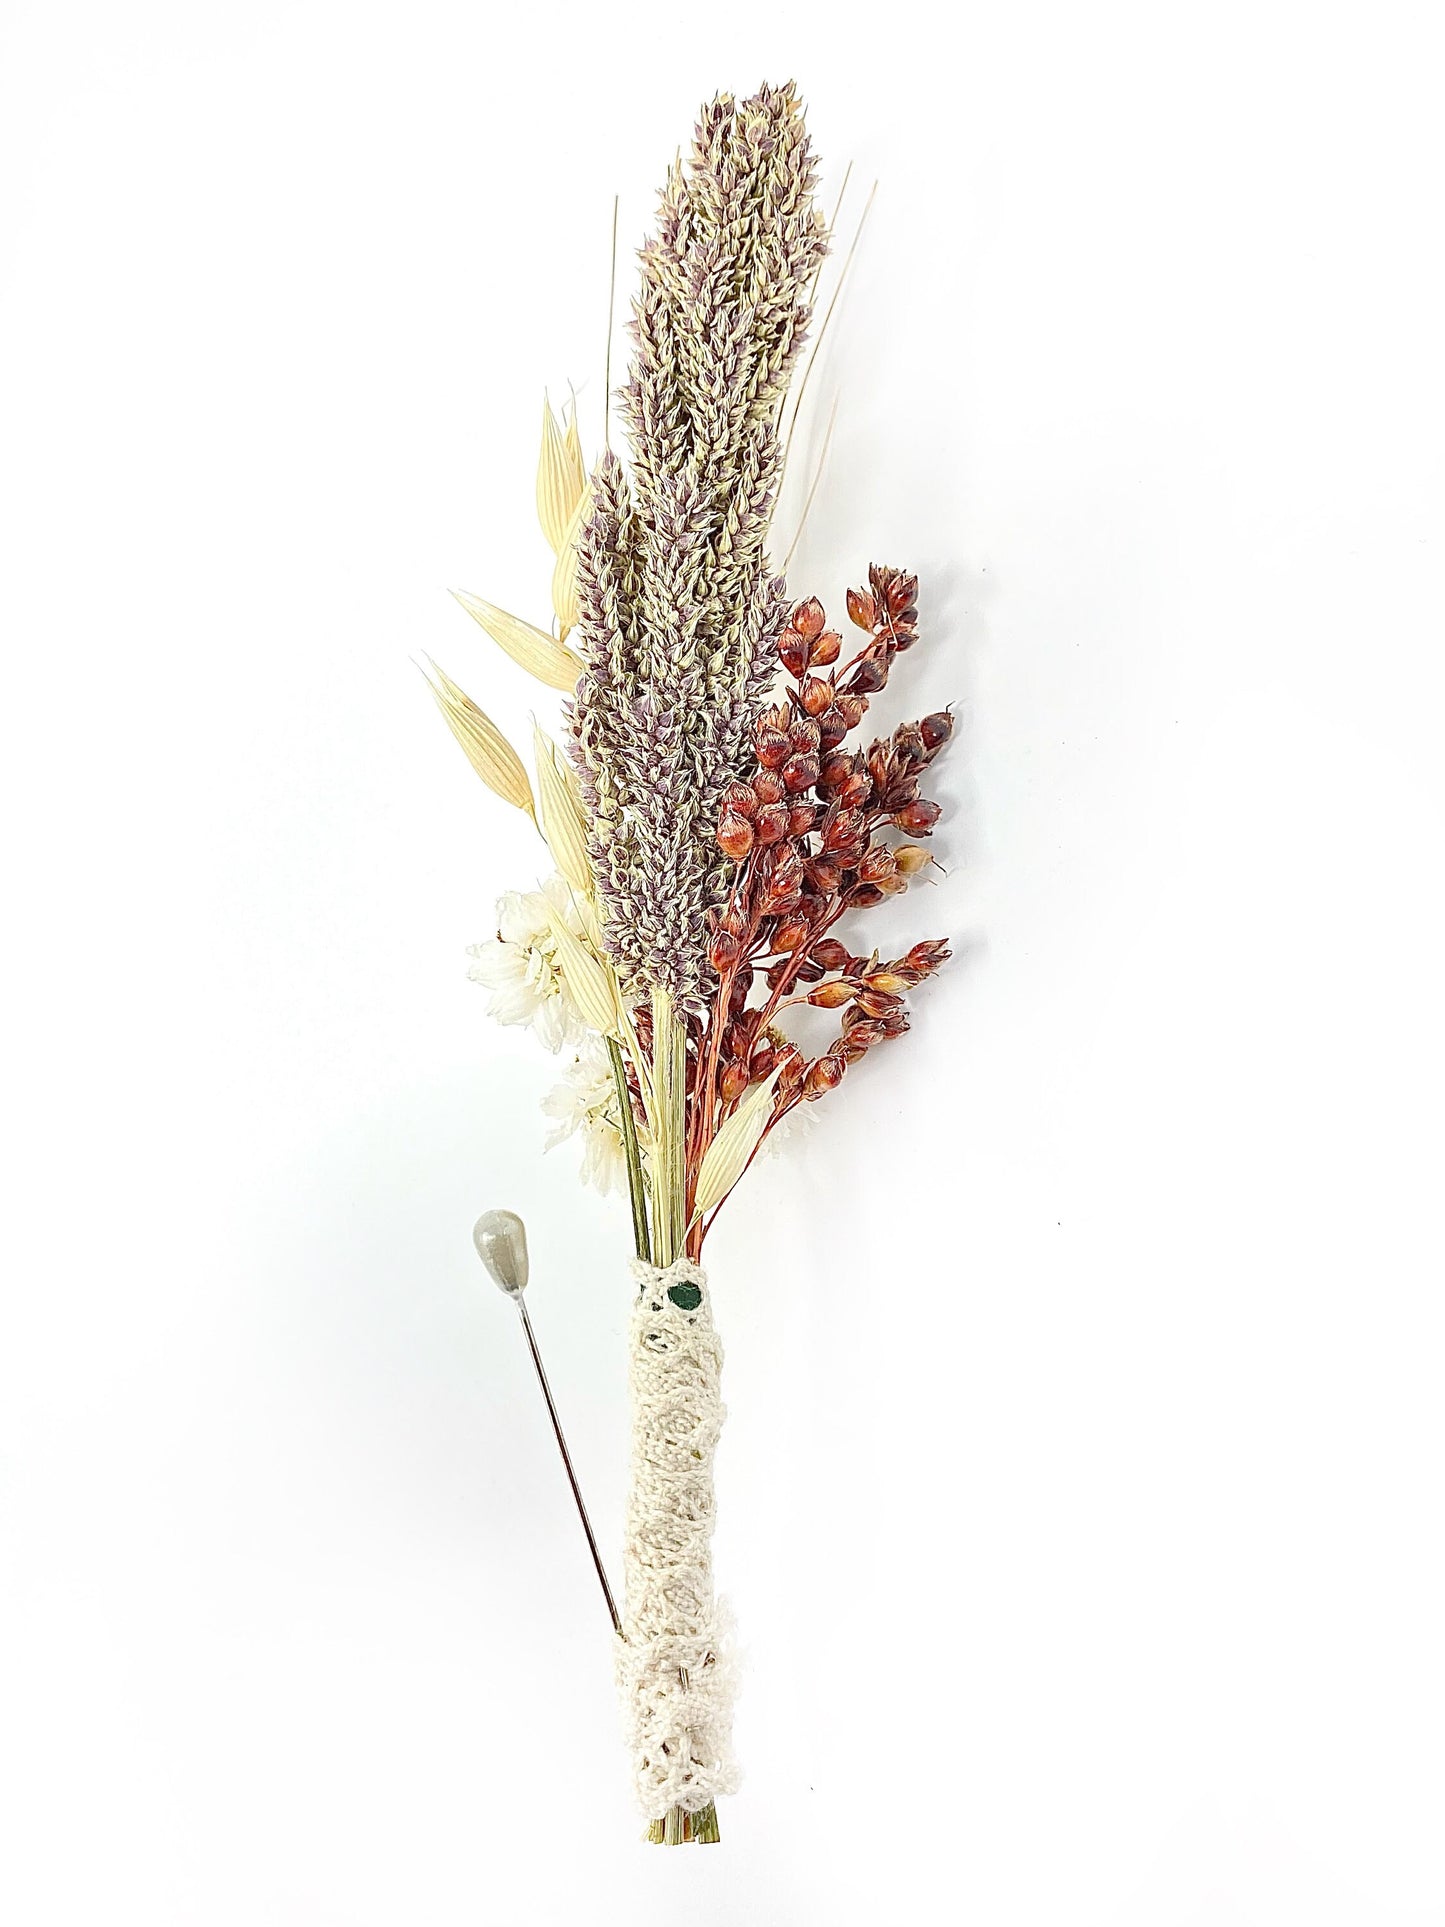 Wedding Boutonniere, Preserved Flowers, Dried Floral, Bridal Accessories, Ammobium, Broom Corn, Beige and Red